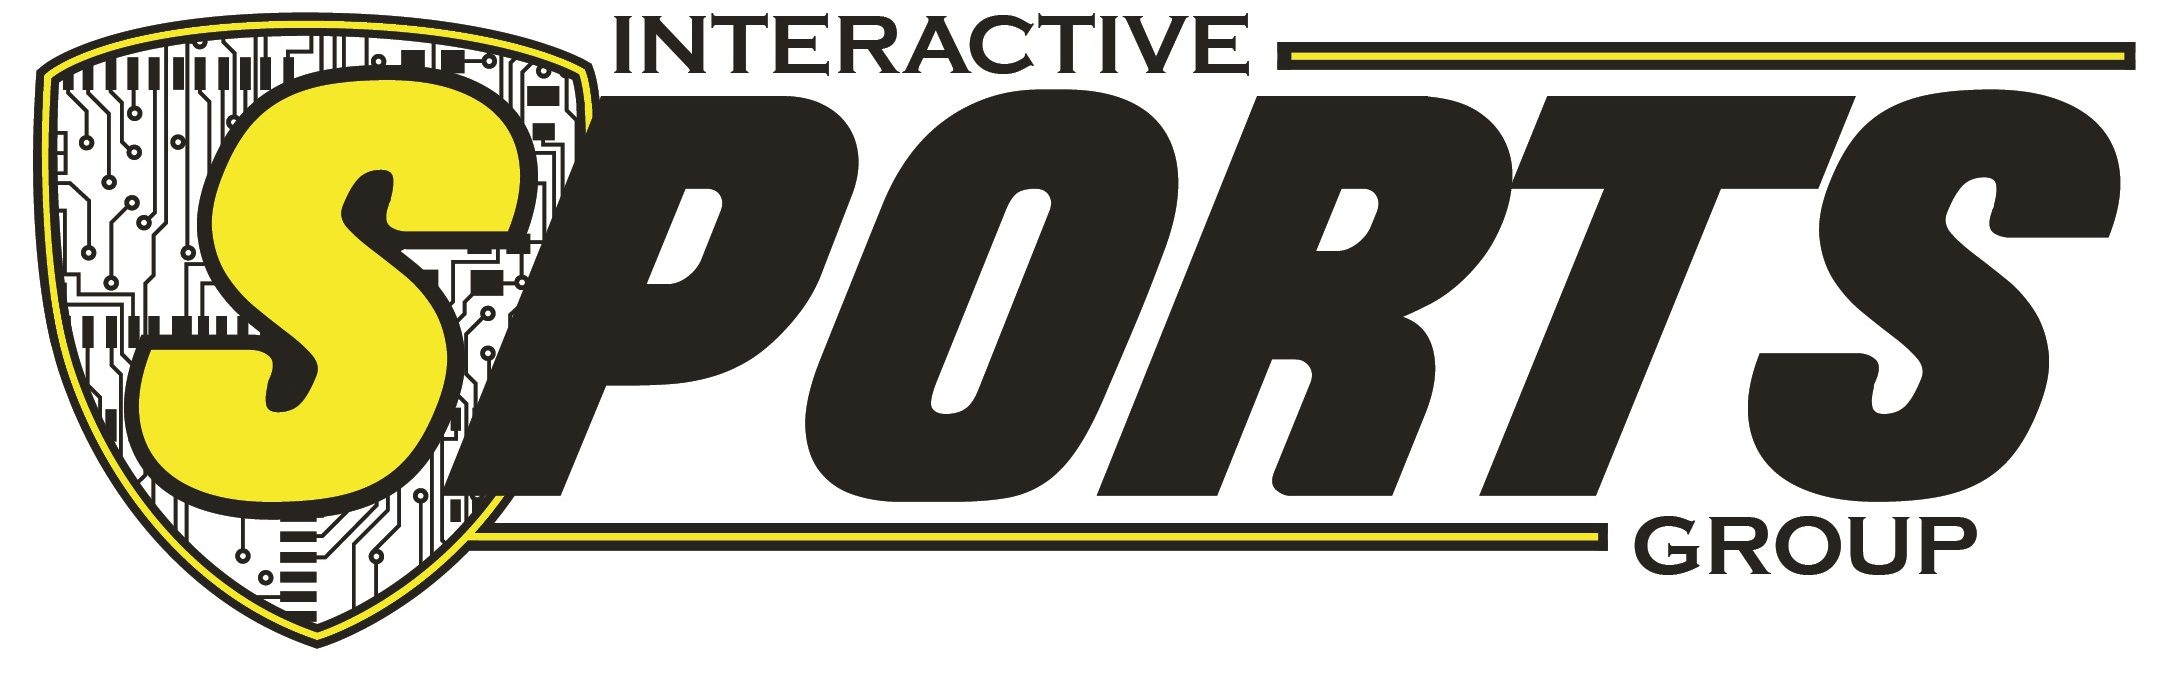 cropped-Interactive-Sports-Group-Logo.jpg